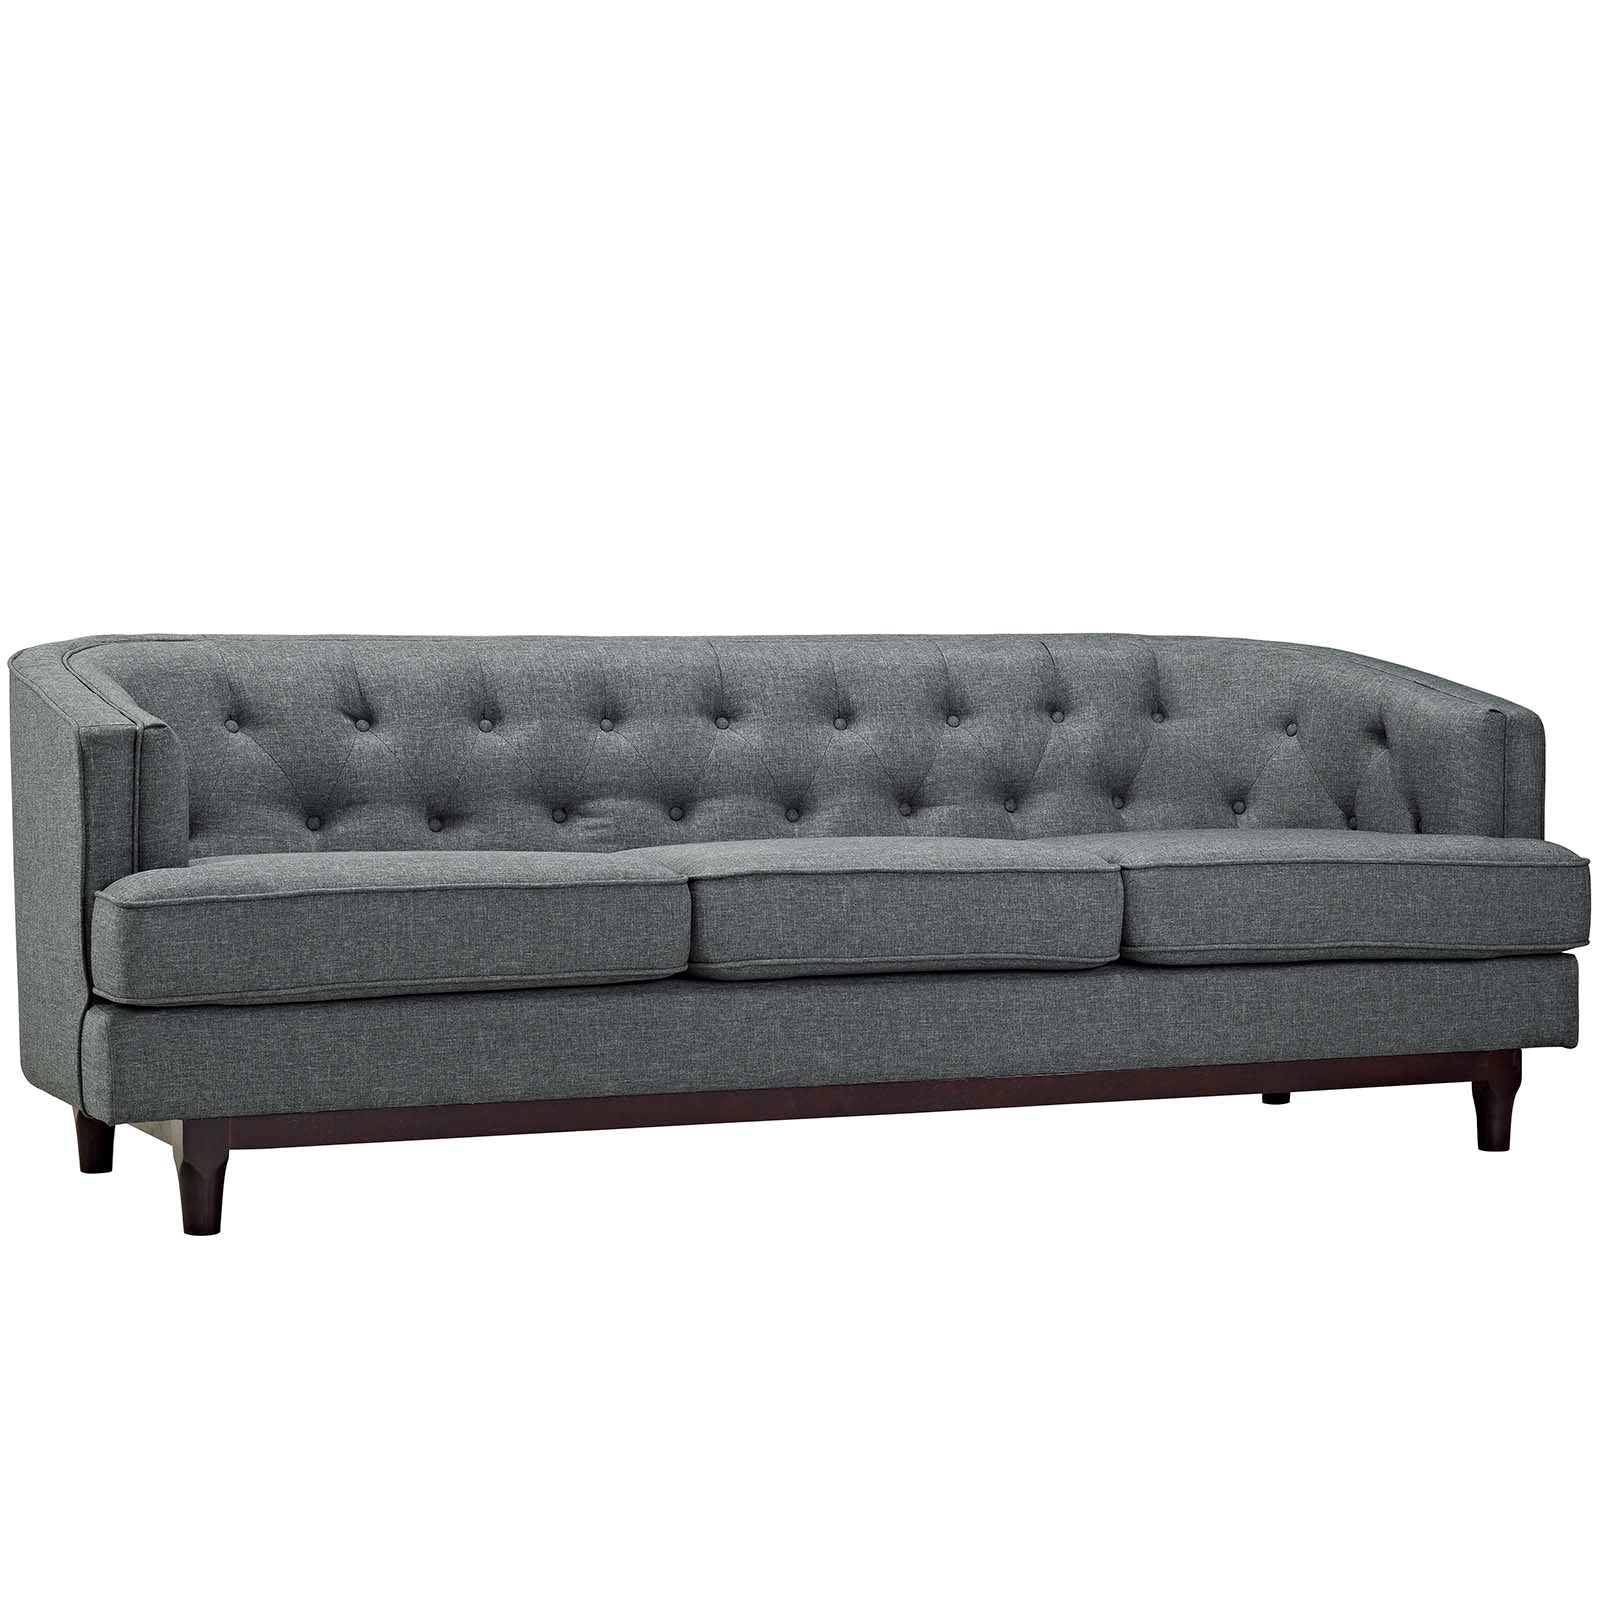 Modway Sofas & Couches - Coast Upholstered Fabric Sofa Gray